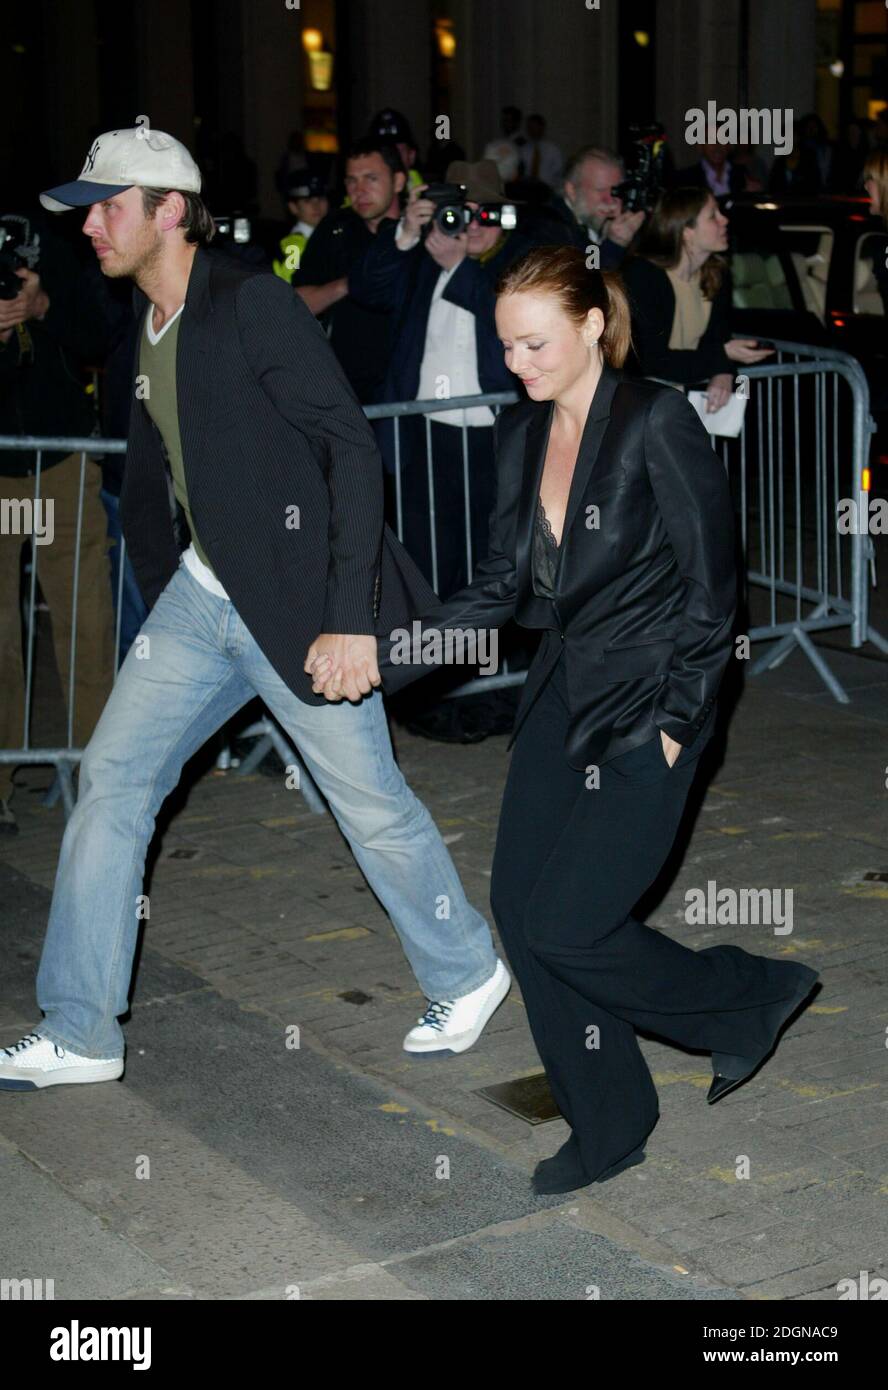 Stella McCartney and Boyfriend at the Saatchi Gallery Launch Party at South Bank in London.  Full length.  Â©Doug Peters/allaction.co.uk  Stock Photo